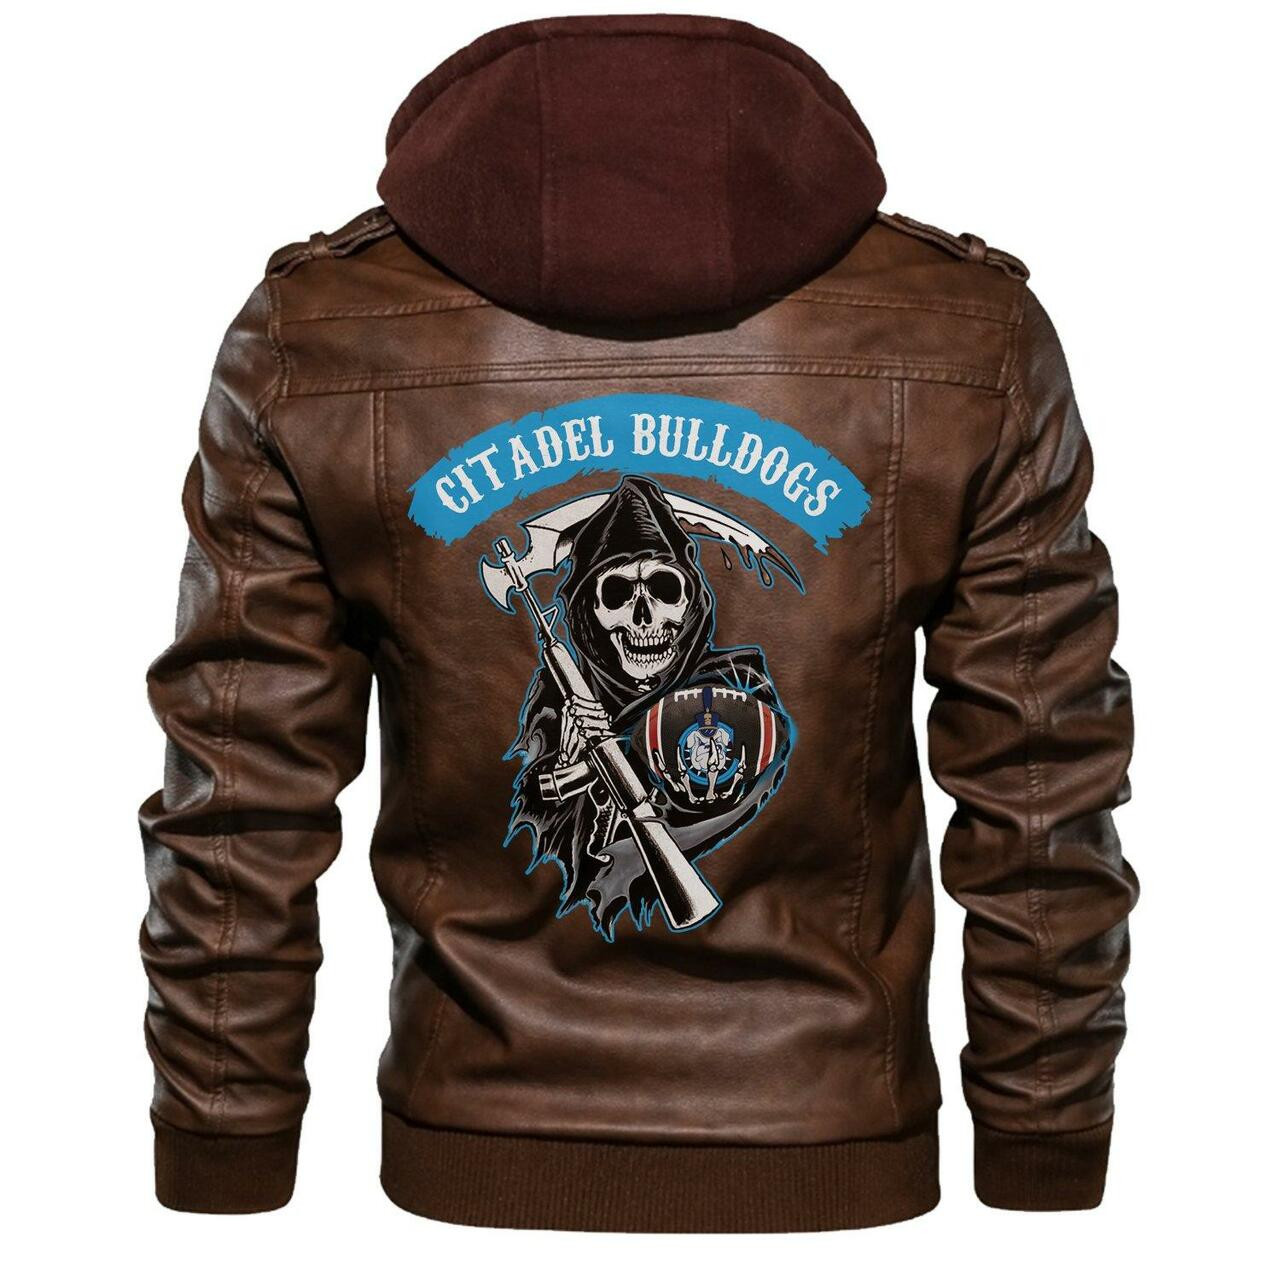 These Leather Jacket are popular options for Winter 123